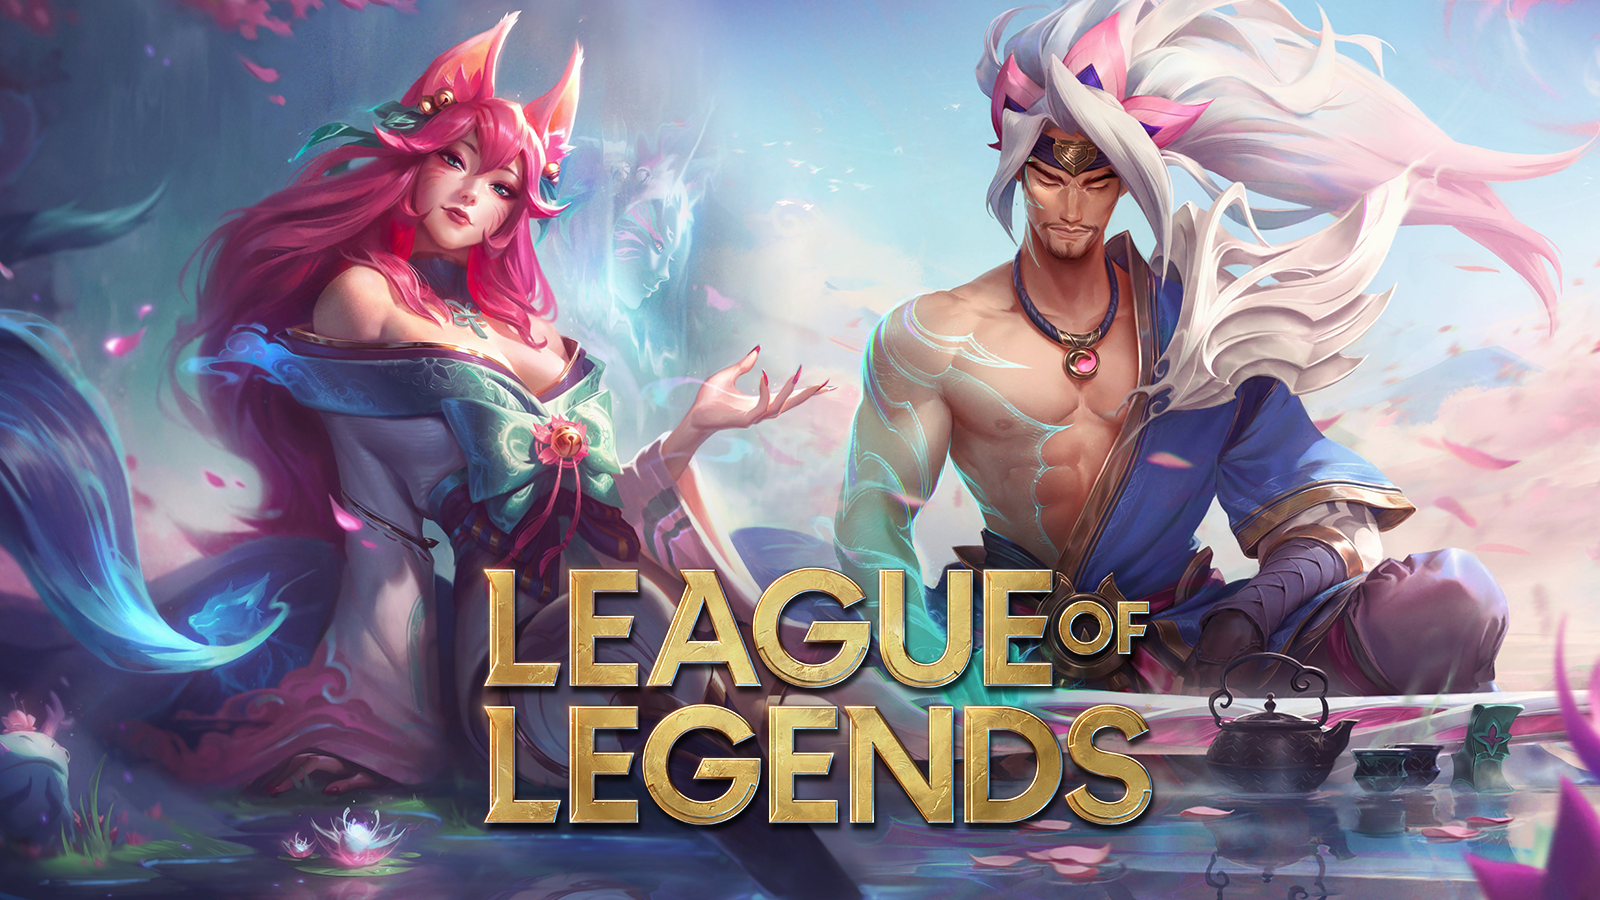 Leauge of Legends Spirit Blossom Event - How To Get Rich on Event